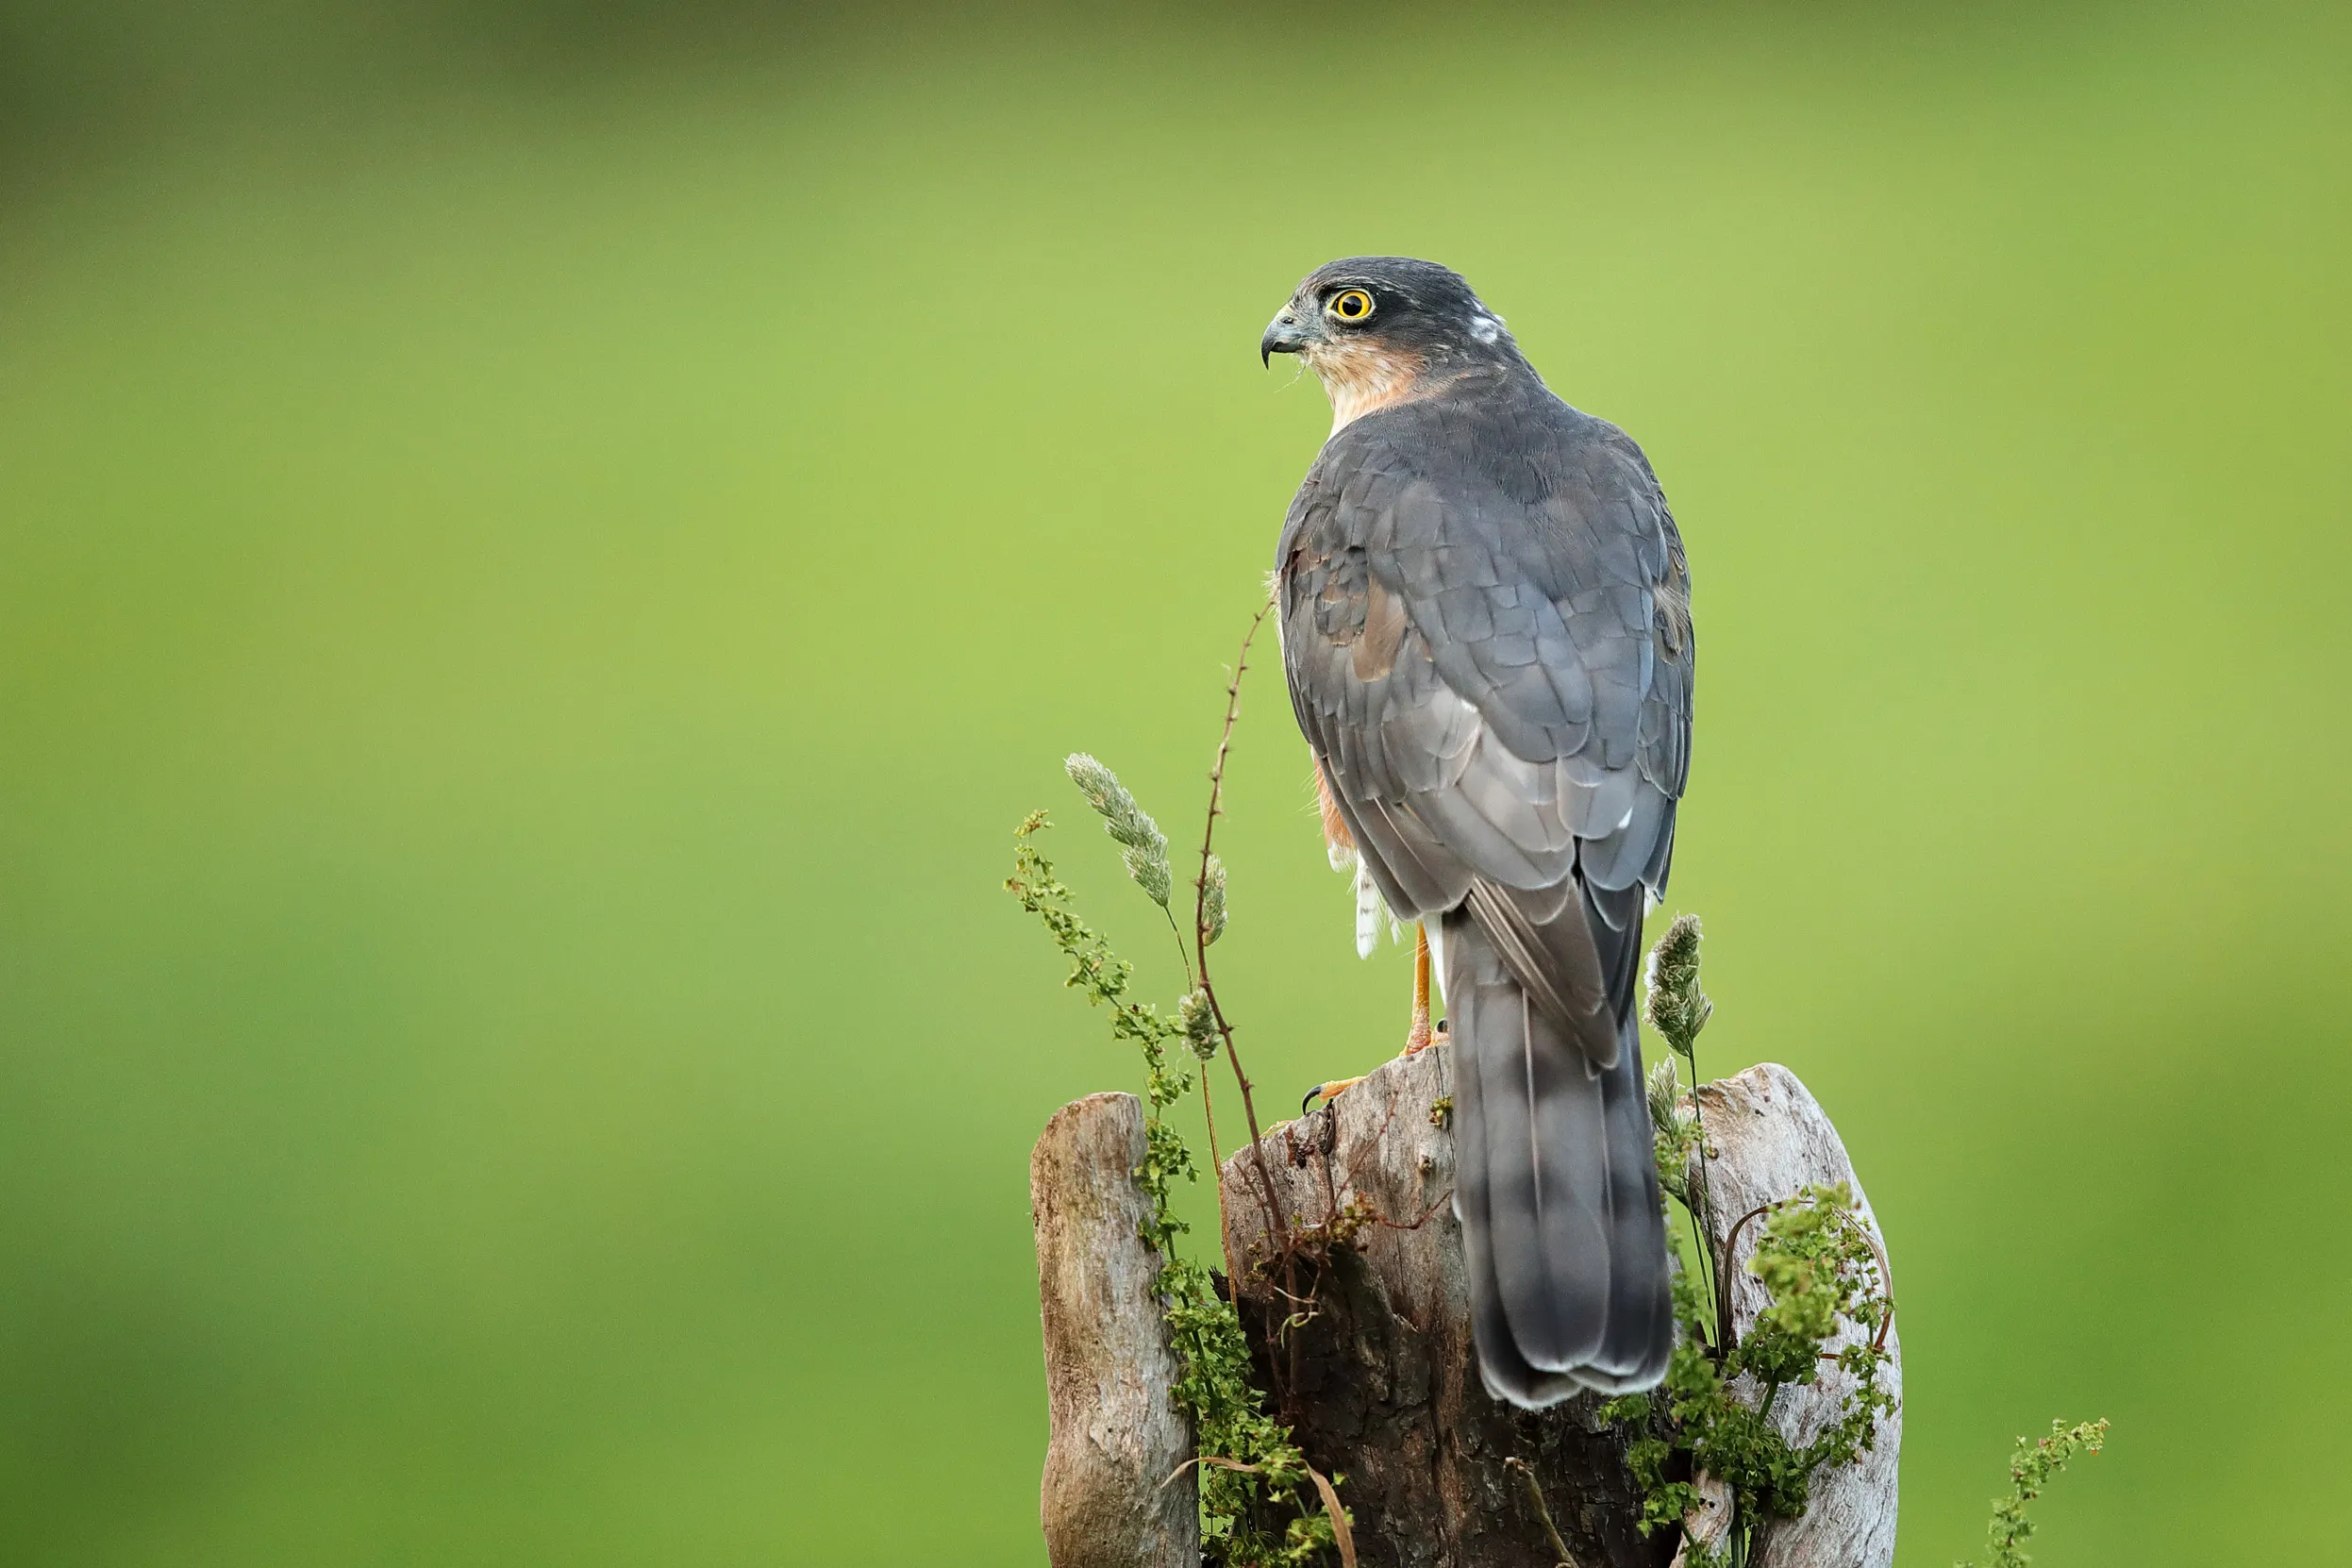 A lone male Eurasian Sparrowhawk perched with their back to the camera on a moss covered tree trunk.